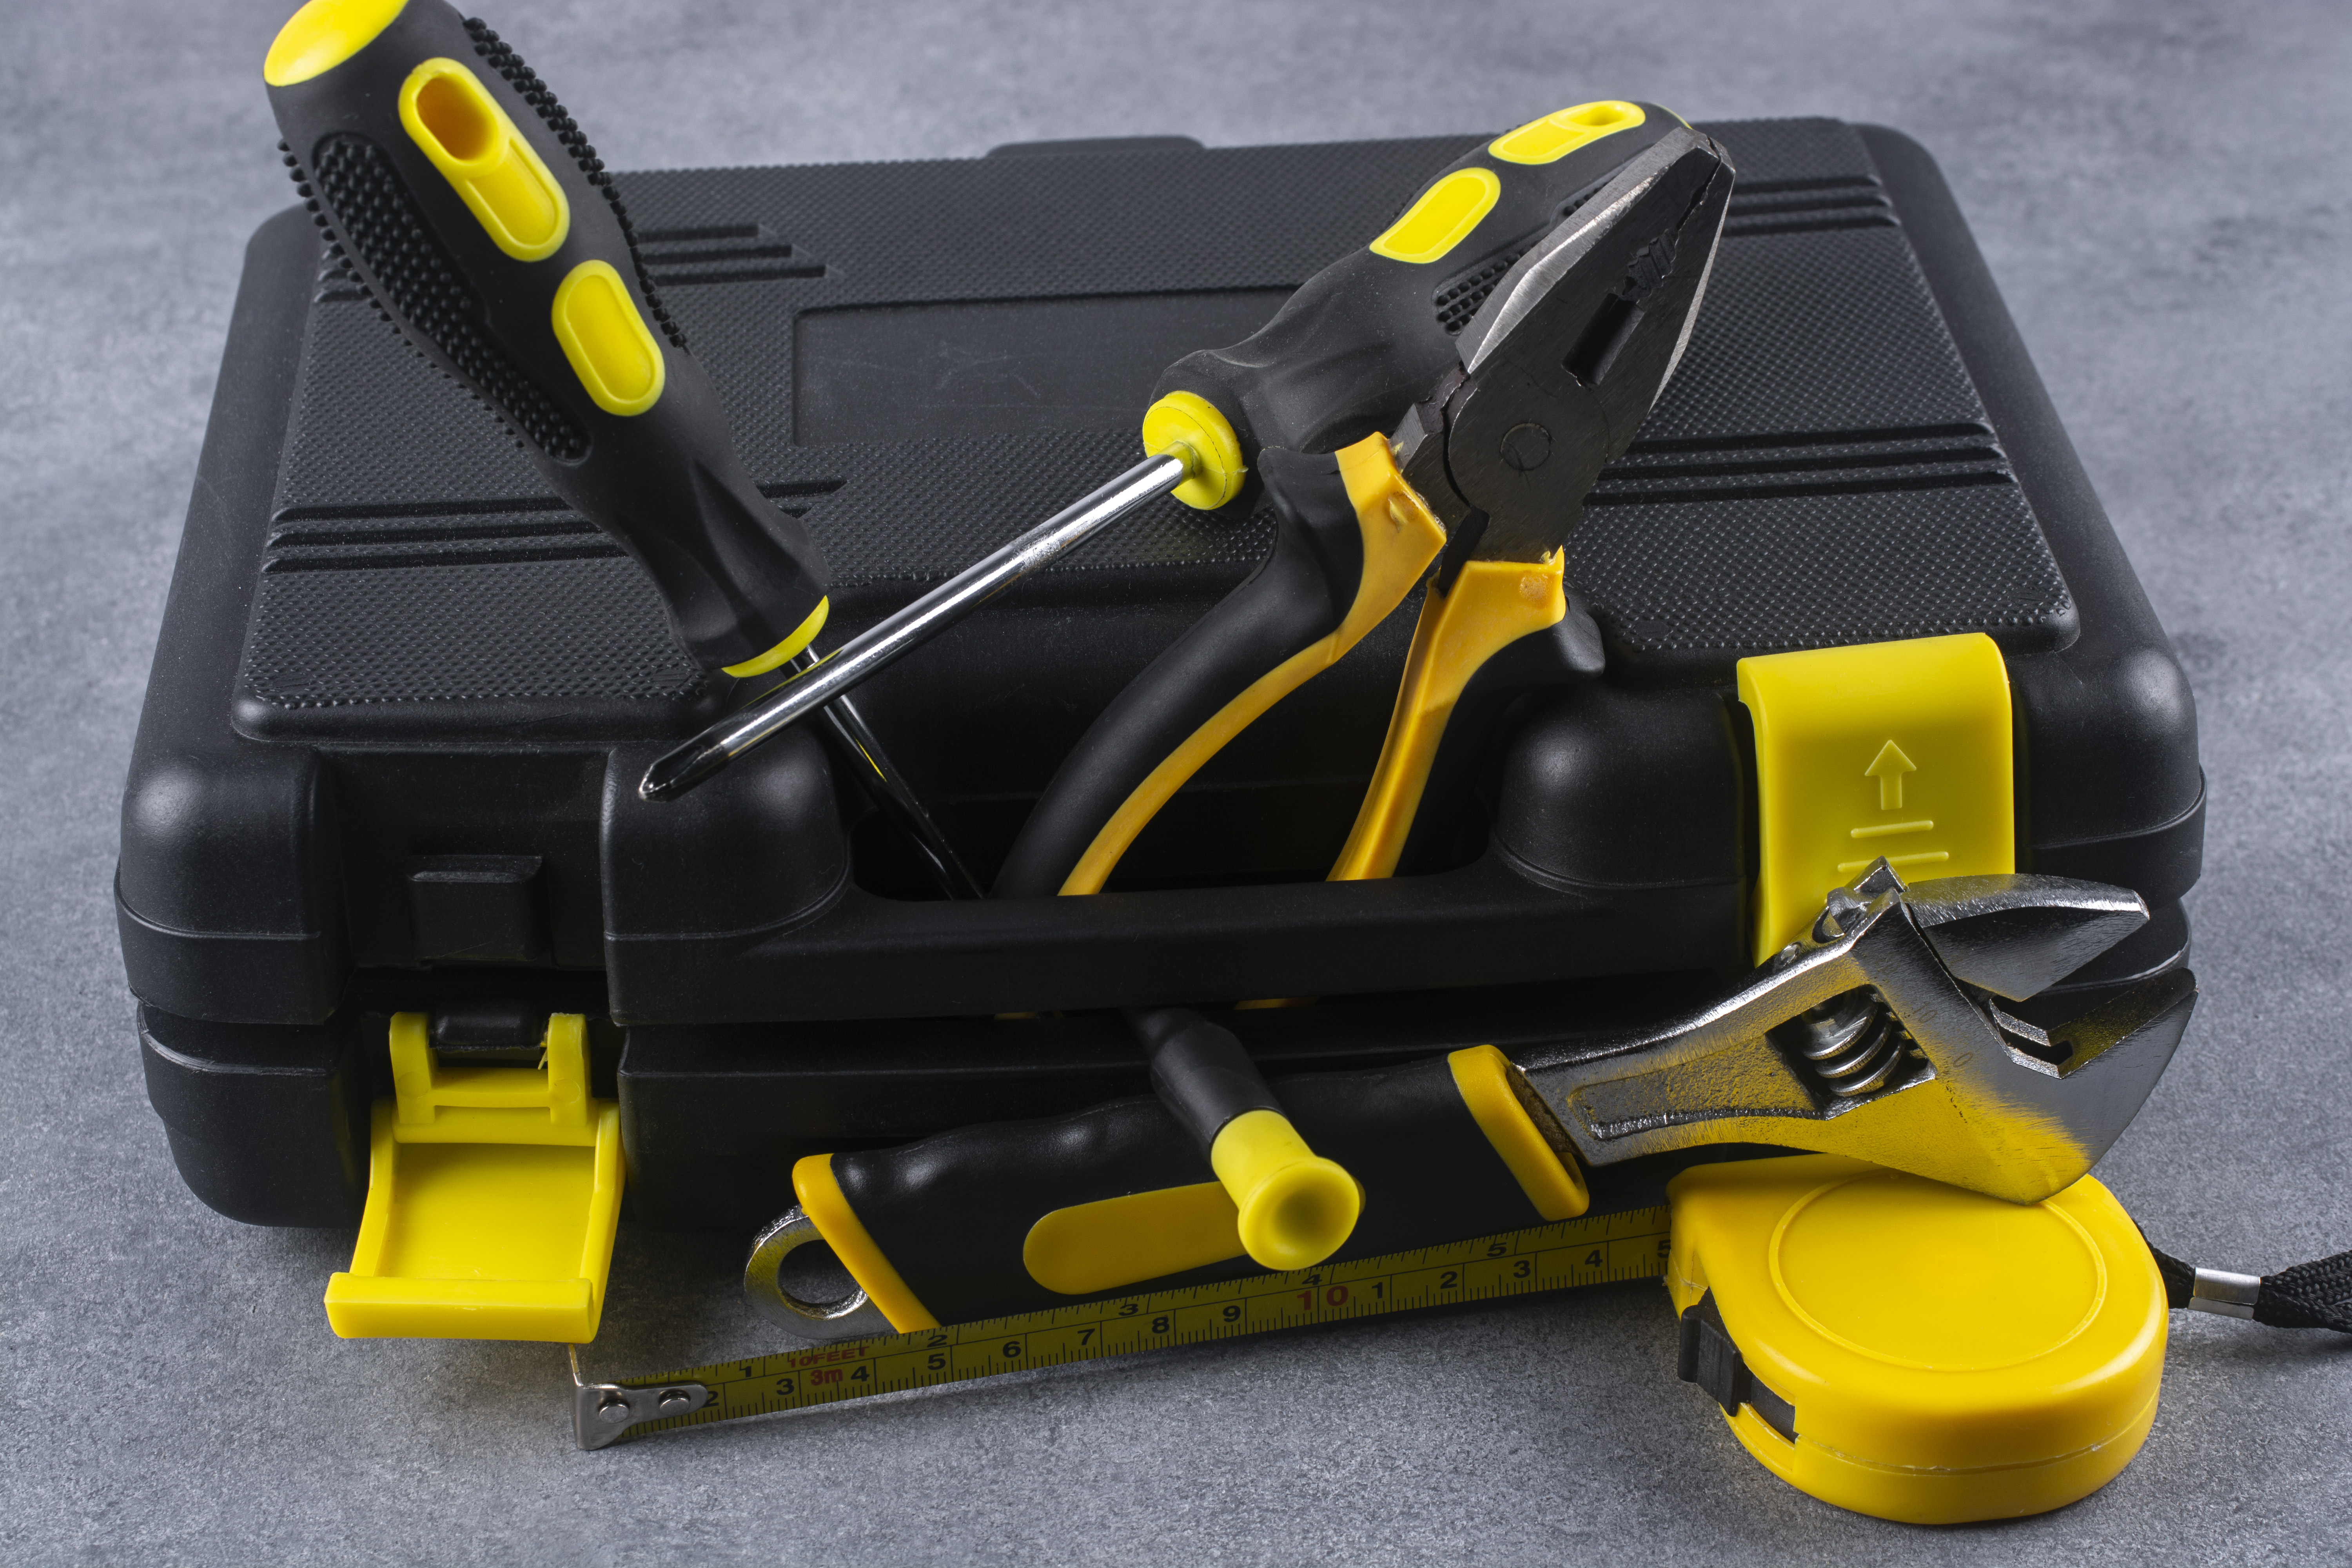 A close-up photograph of a black plastic case filled with various repair tools, such as screwdrivers, pliers, and wrenches, arranged neatly and organized for easy access